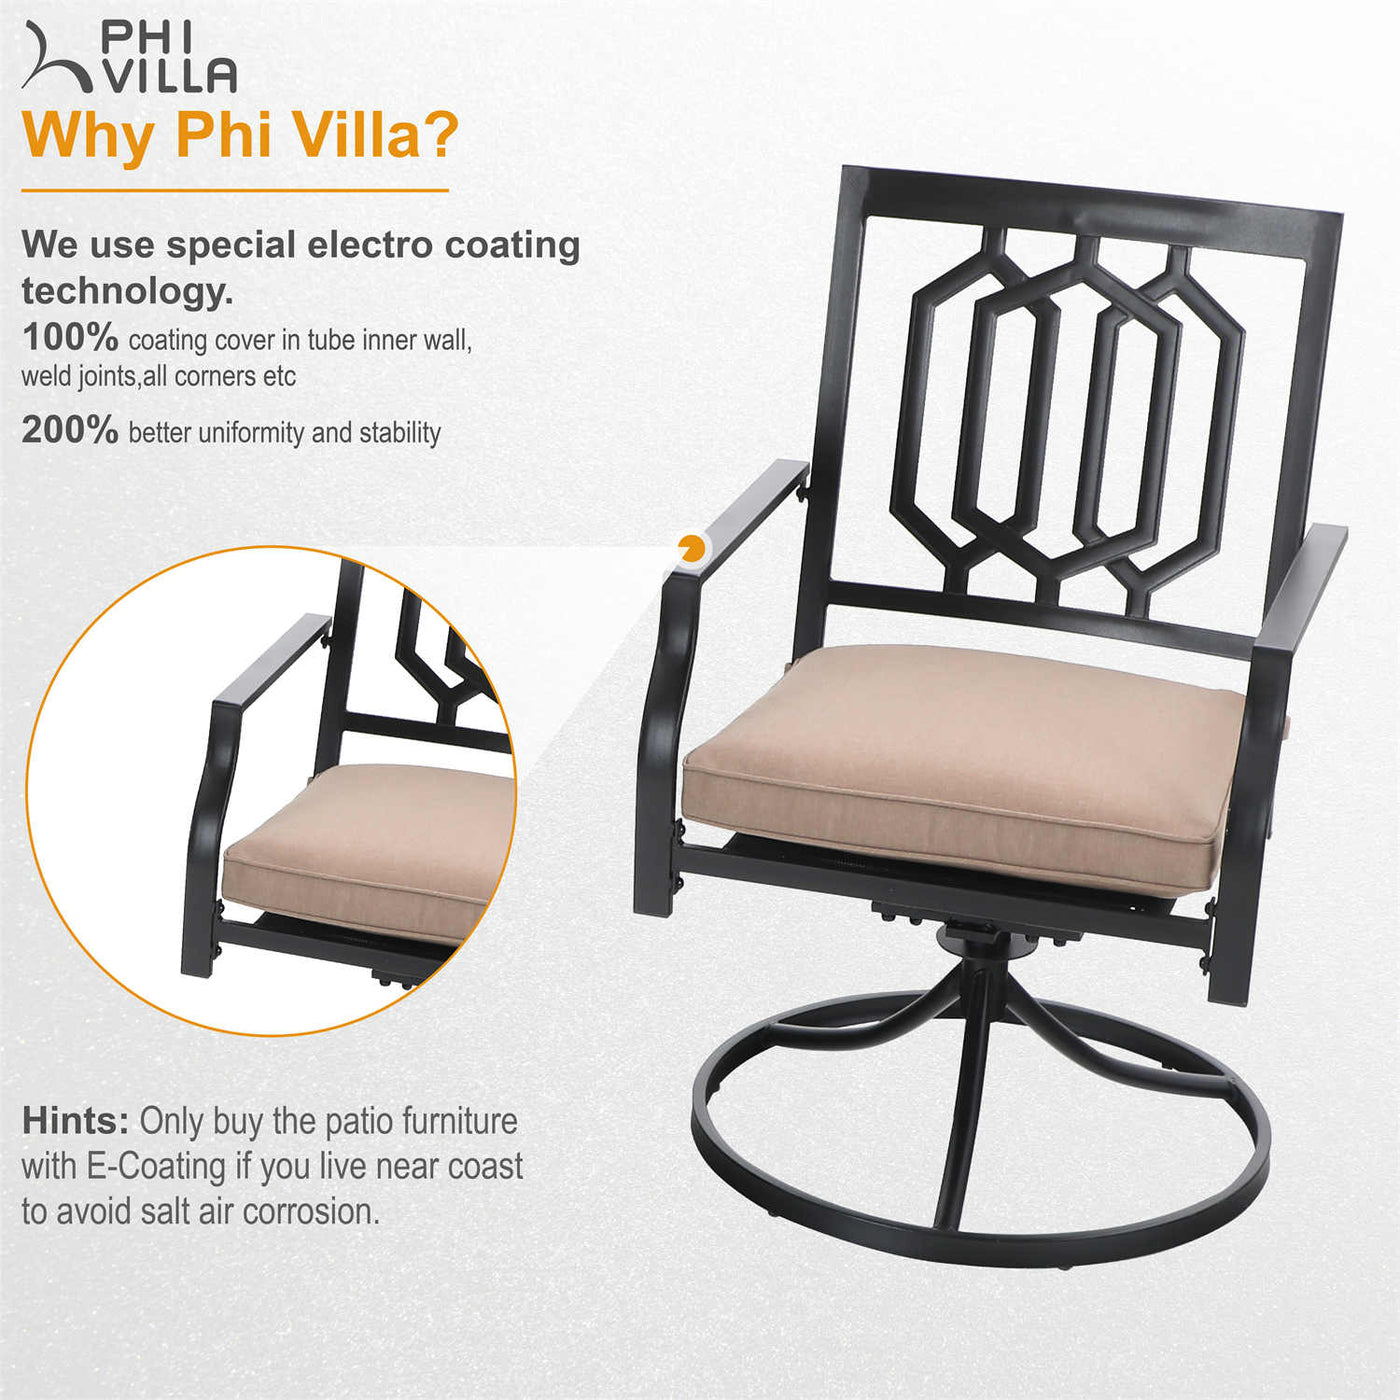 Phi Villa Outdoor Metal Dining Chairs fits Garden Backyard Chairs Furniture - Set of 2 - $155